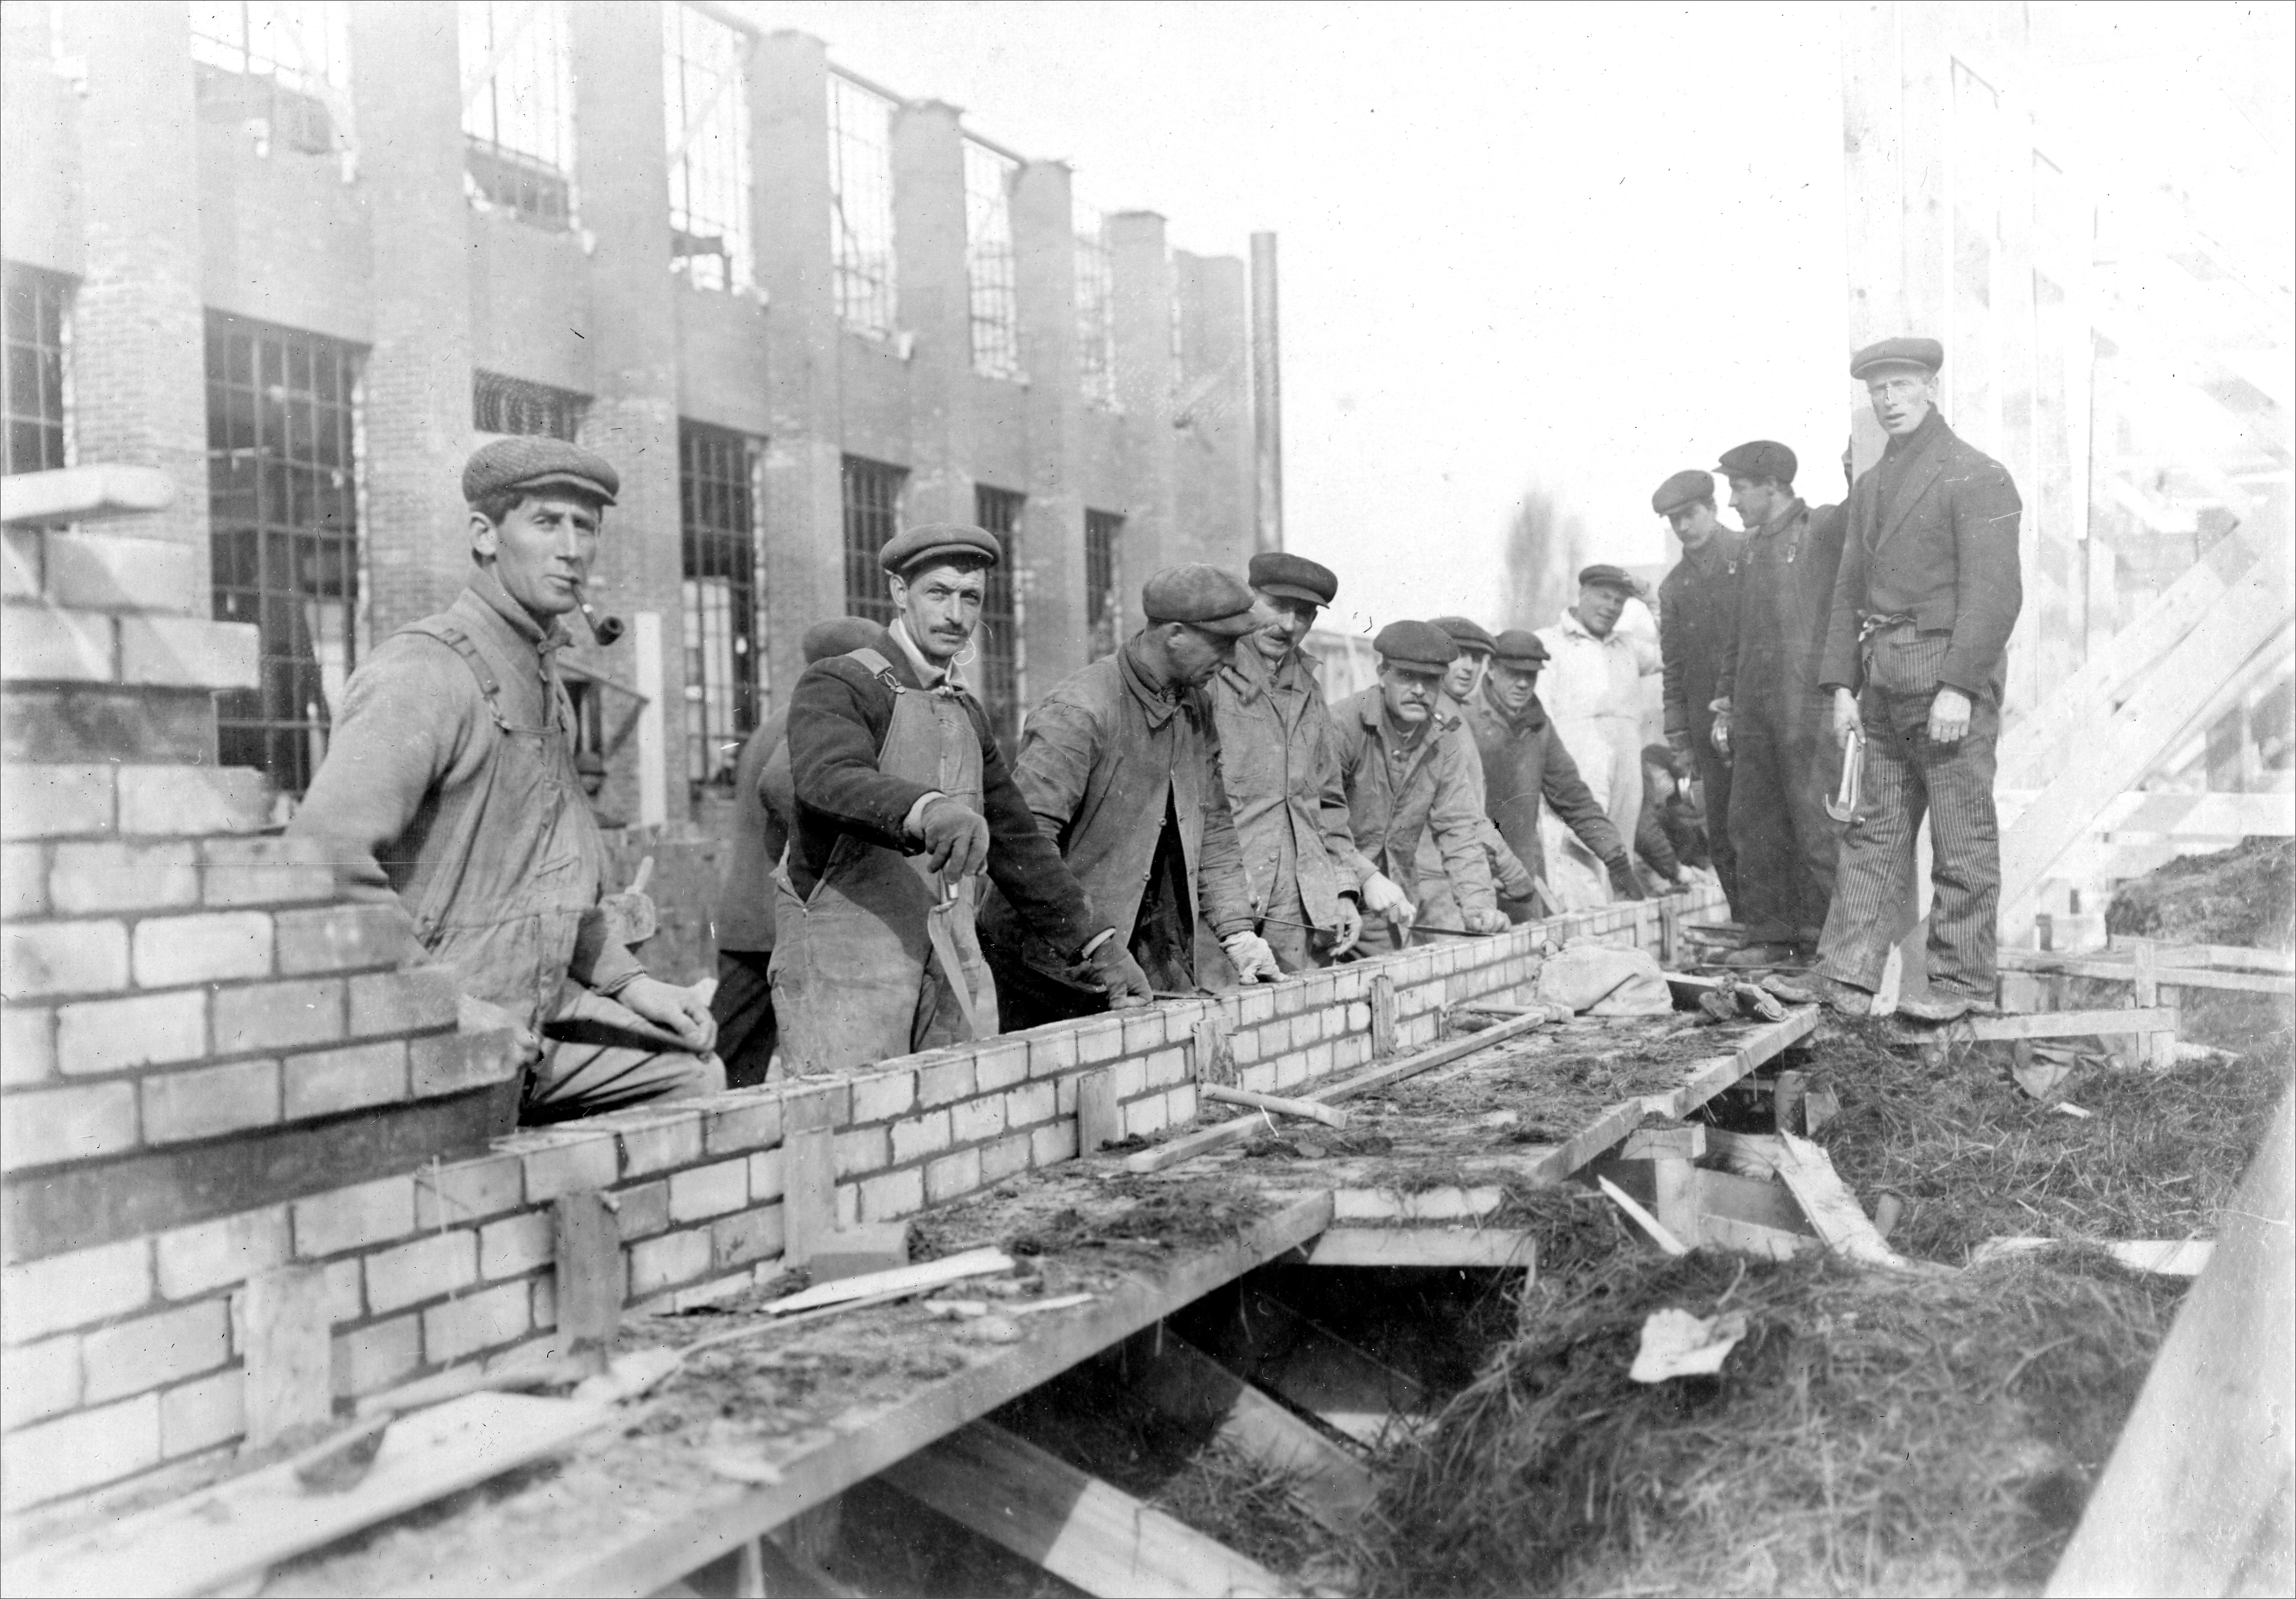 Workers laying bricks at the factory site, ca February 1917.